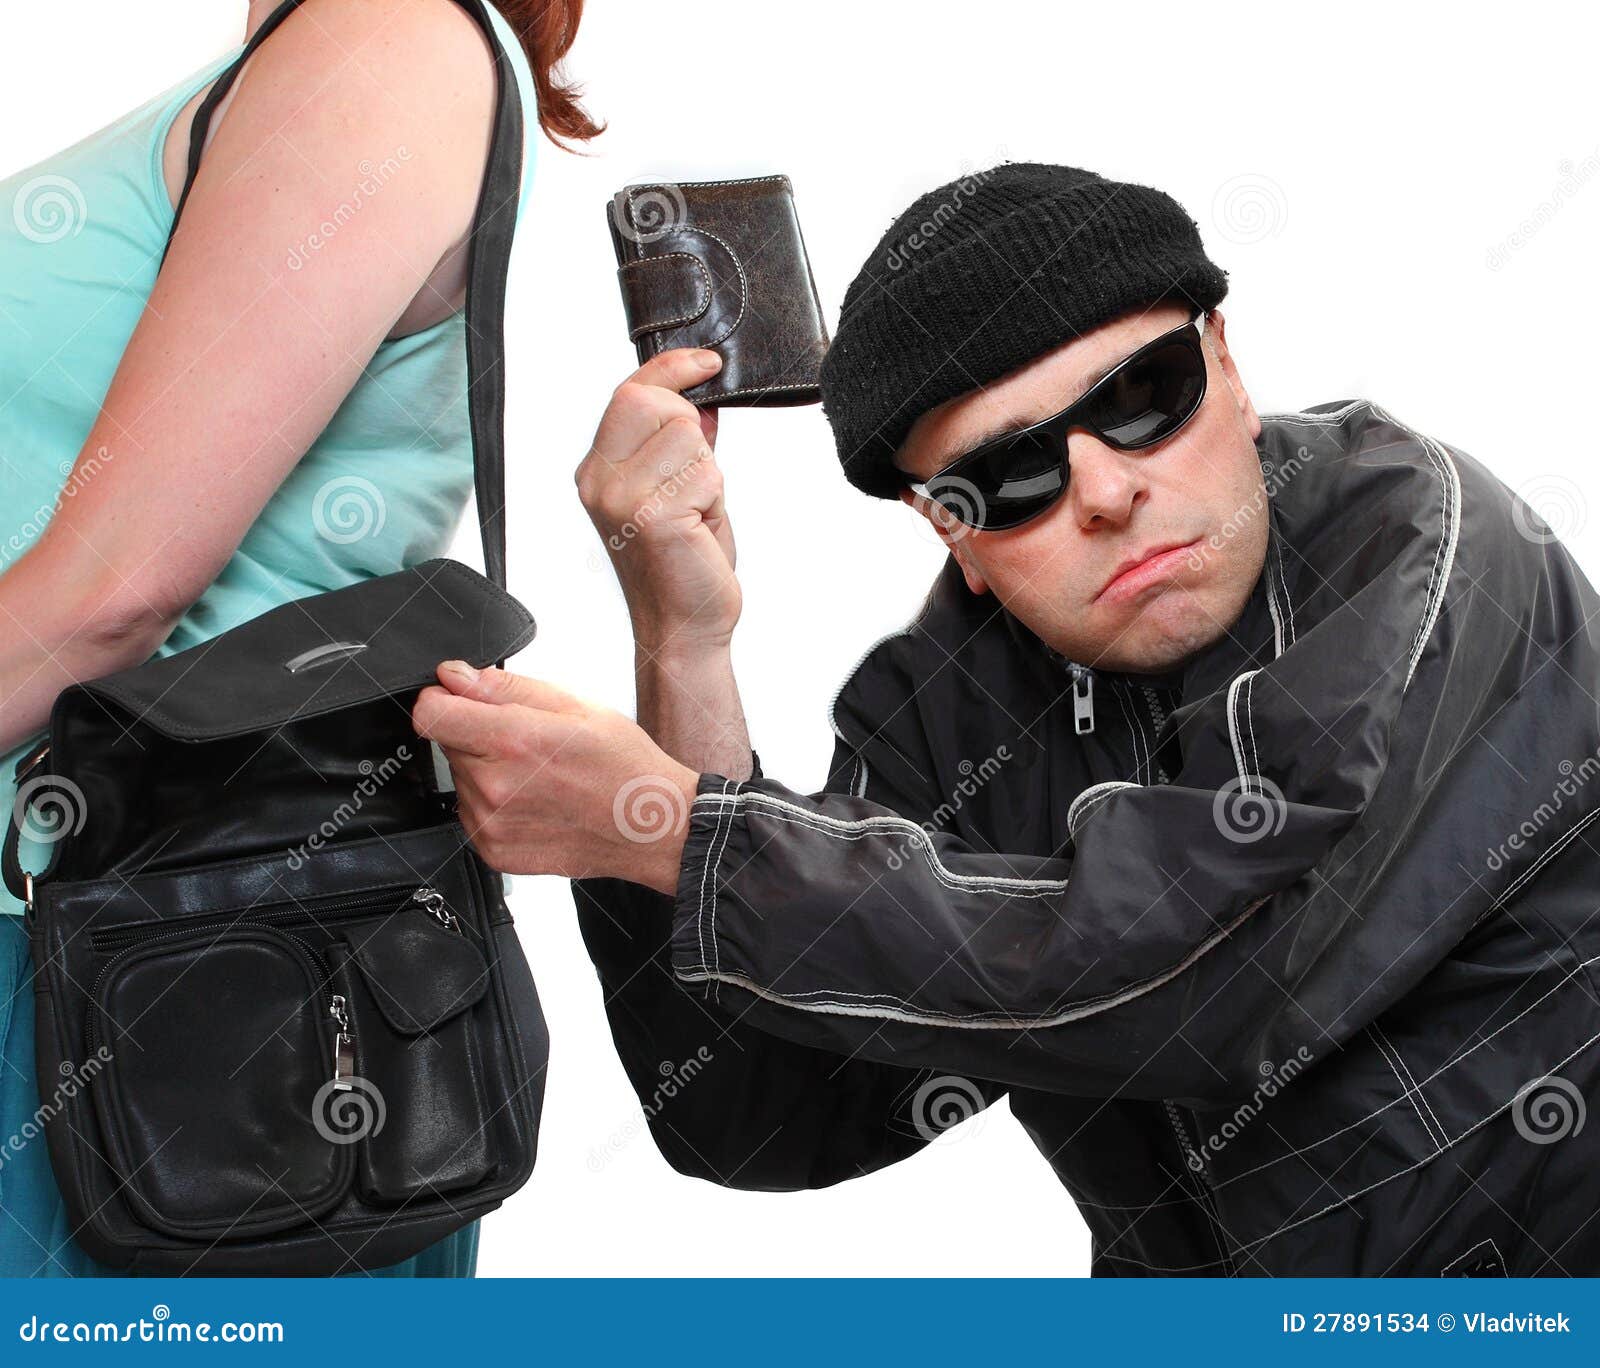 Thief Stealing From Handbag. Stock Photo - Image of attack, insurance:  27891534